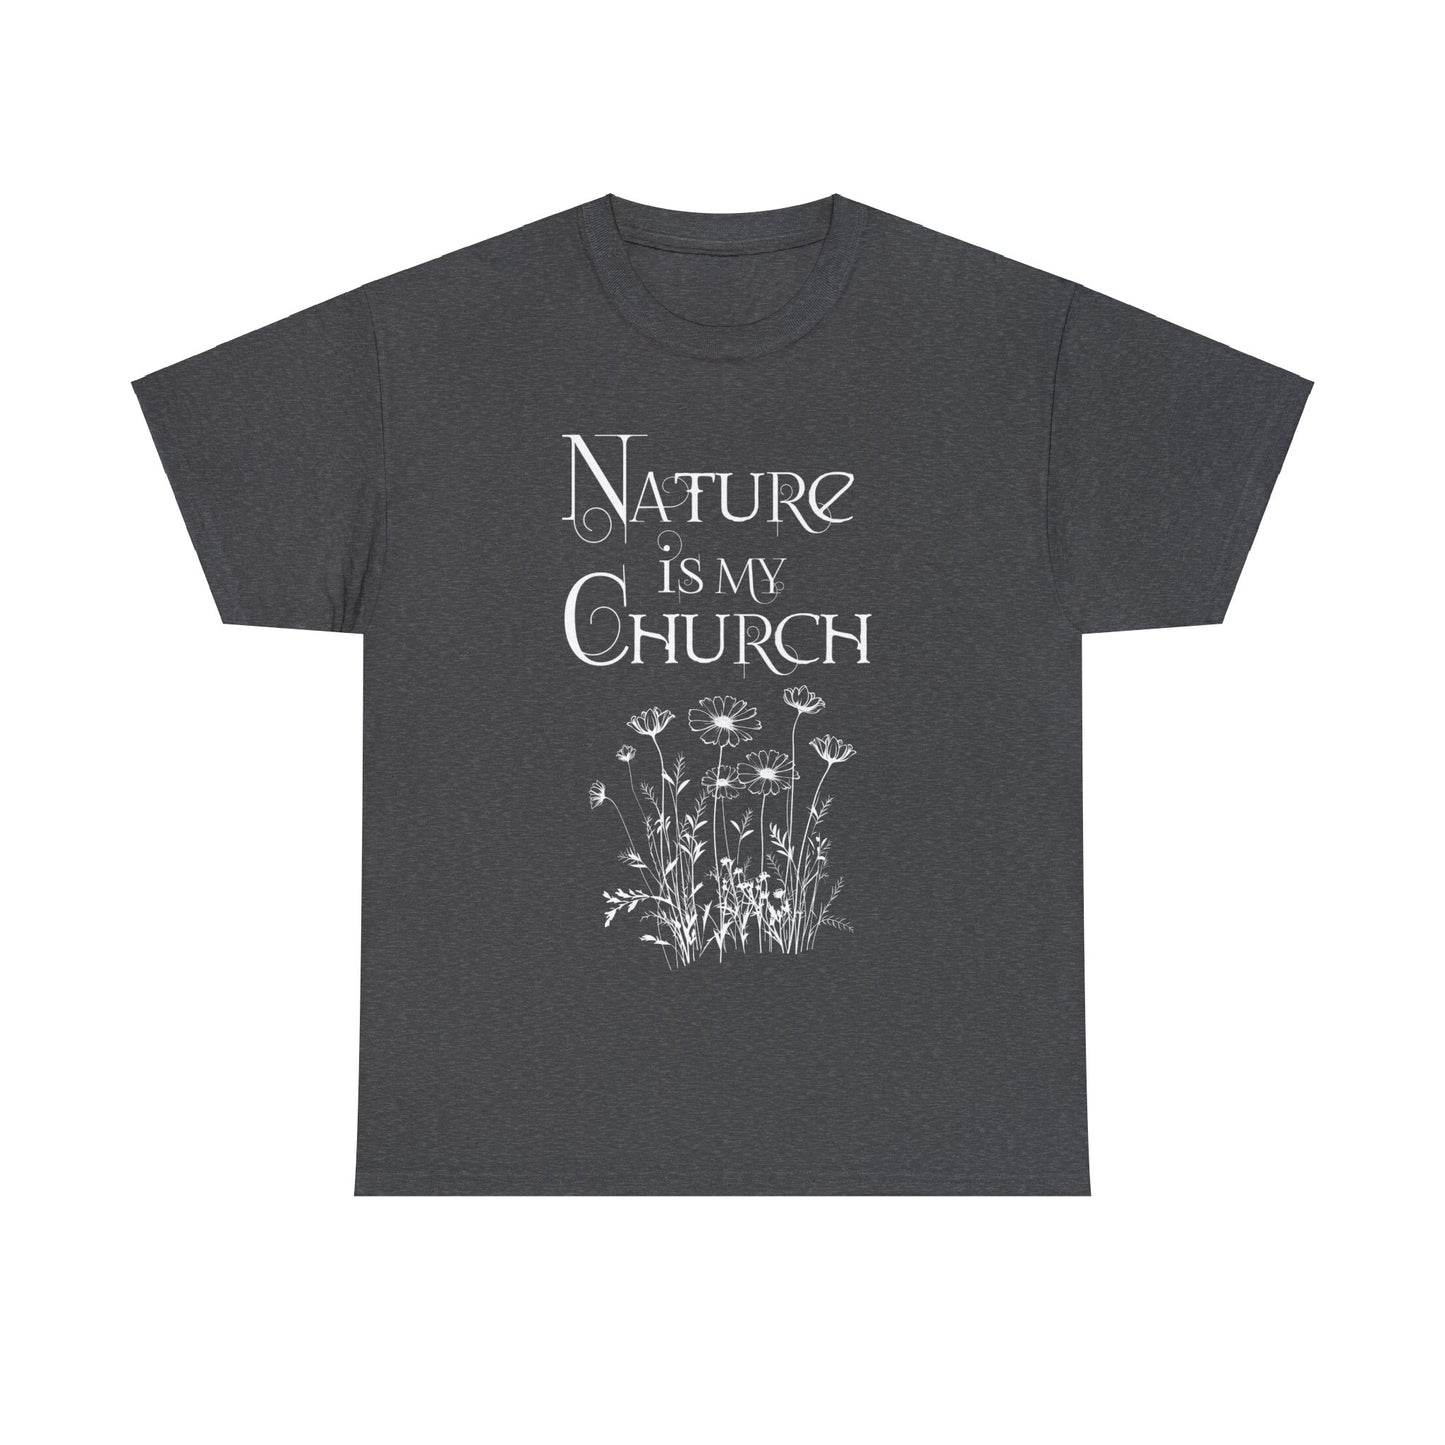 Nature is my church Cotton t-shirt